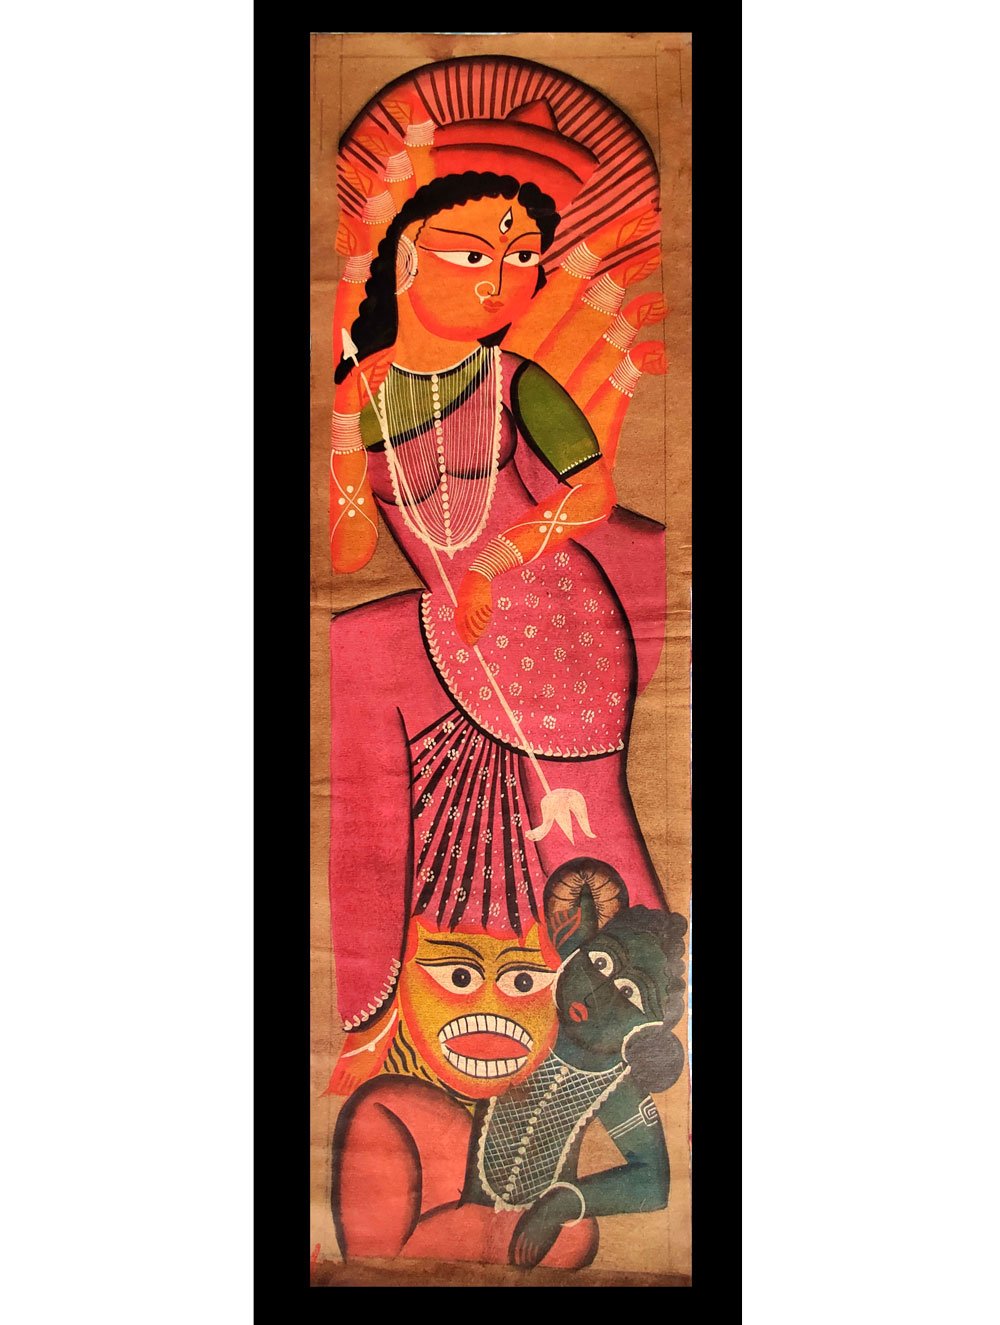 Load image into Gallery viewer, Kalighat Painting - Goddess Durga